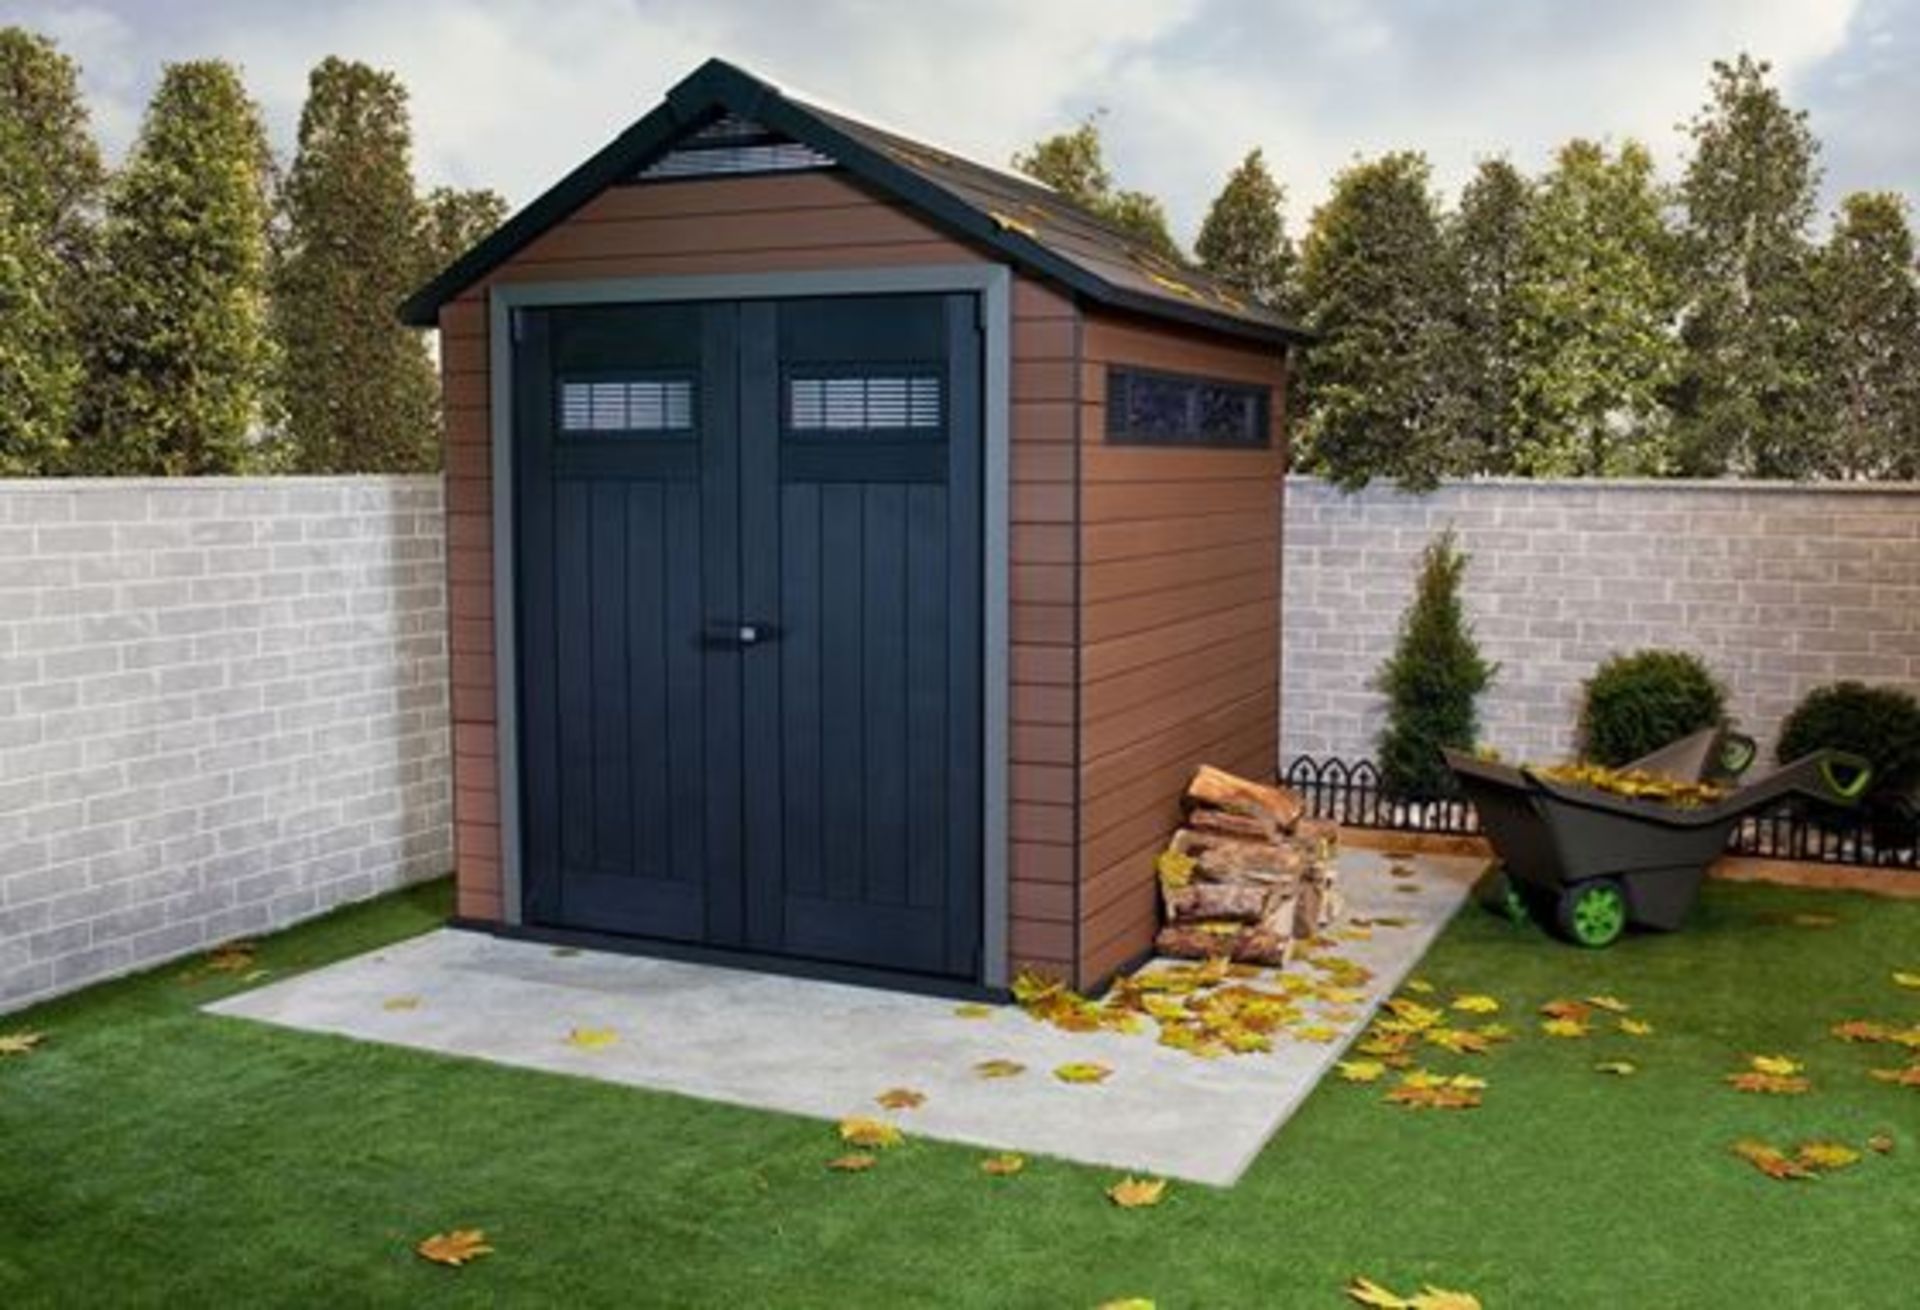 New but unboxed on a pallet Keter Fusion 757 Garden Shed - As new but unboxed on pallet From the